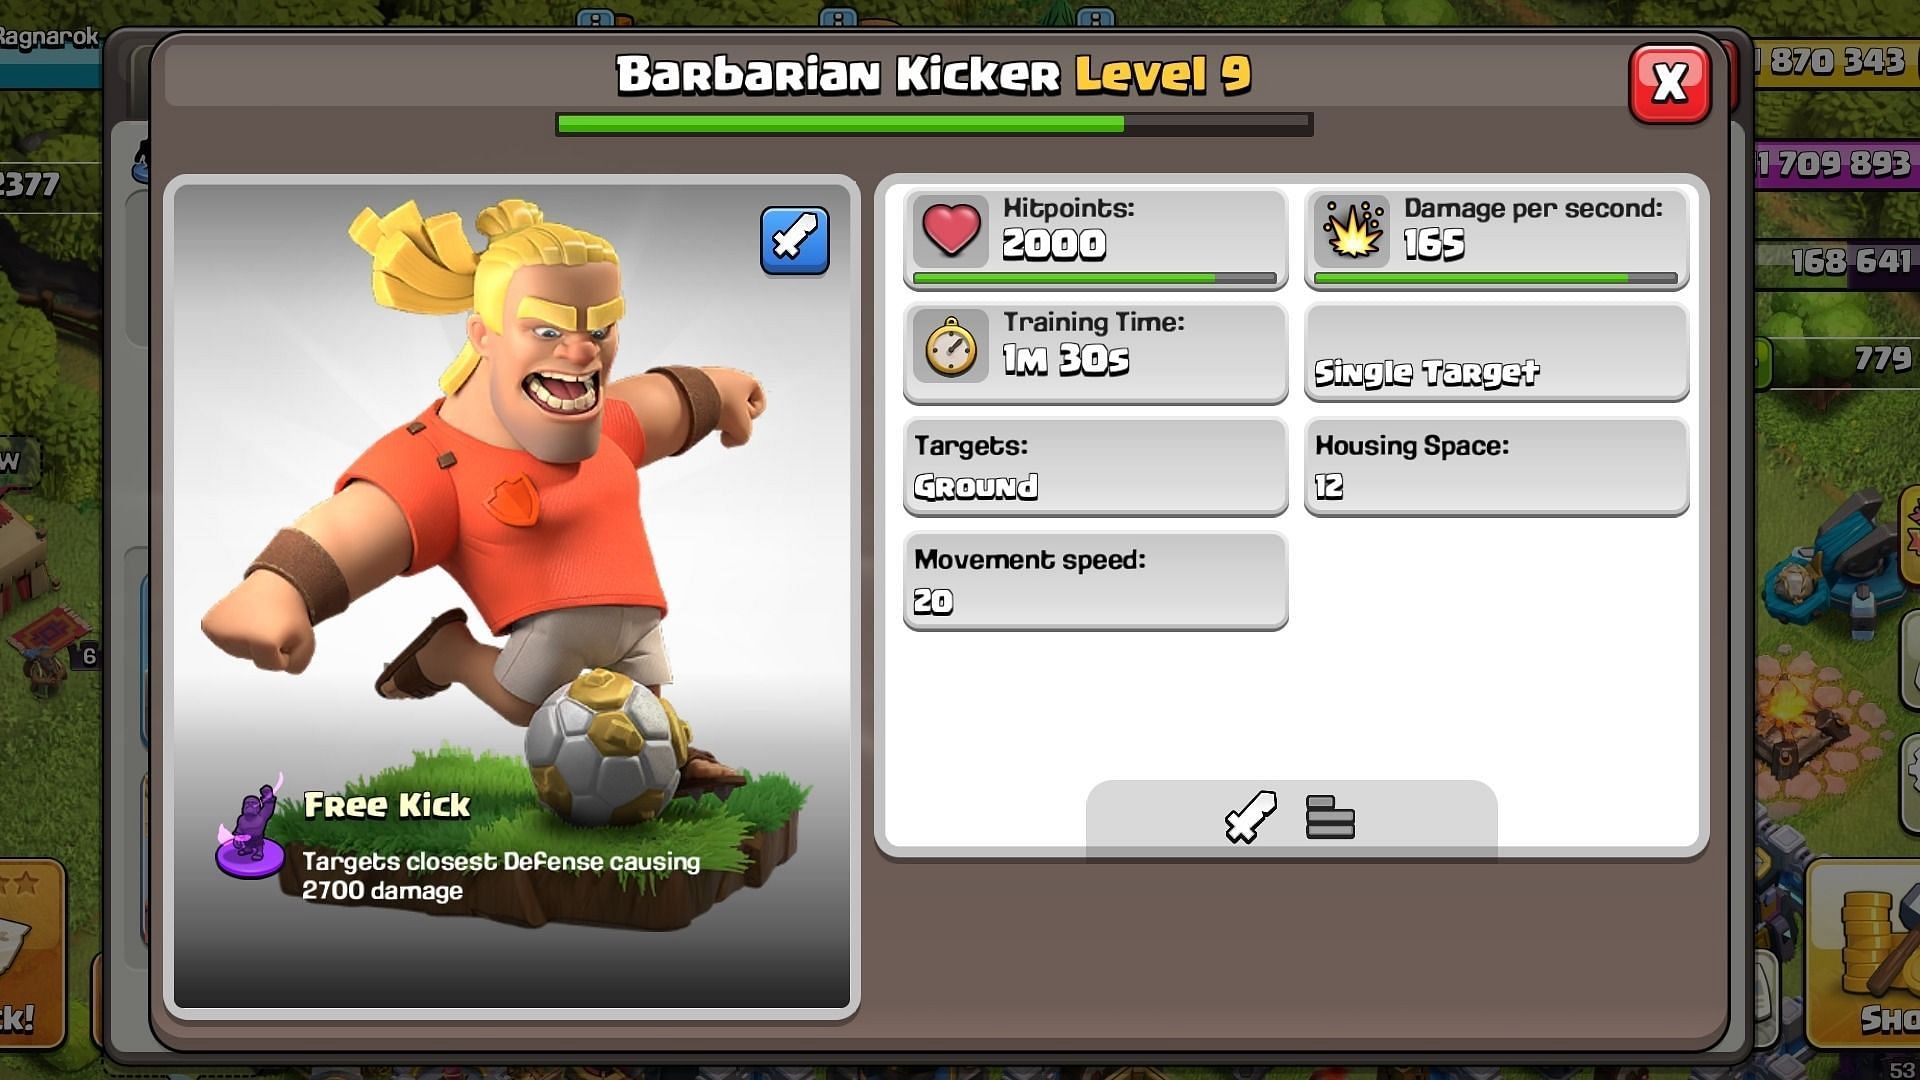 Make the most of Barbarian Kicker (Image via Supercell)